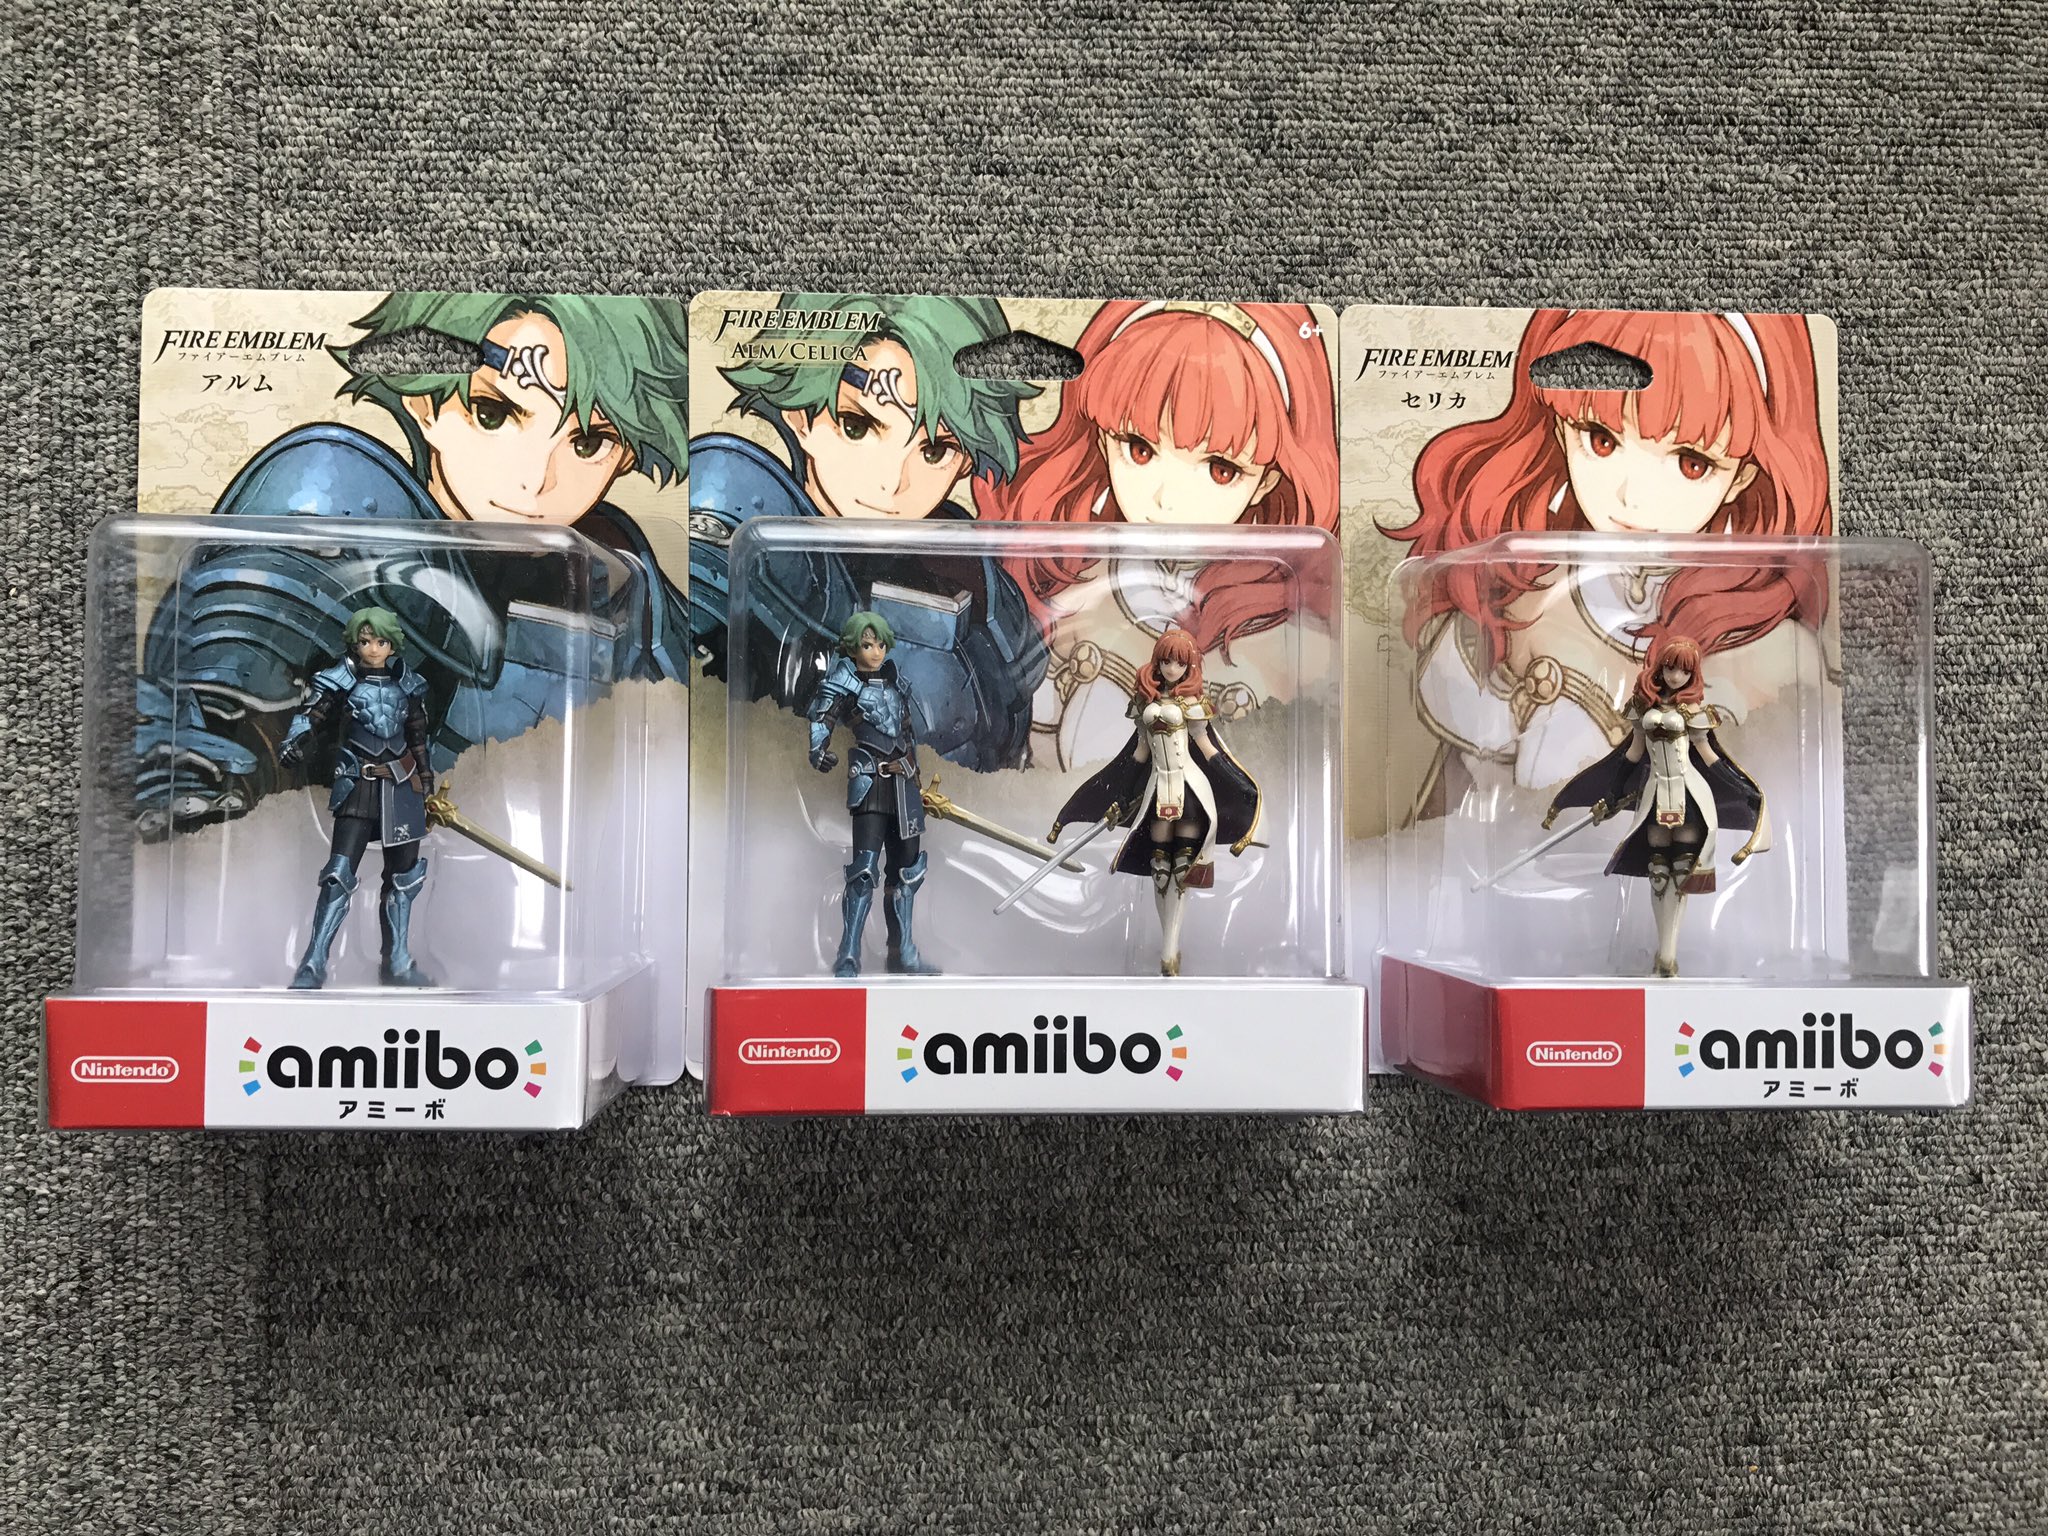 mikrofon Tredive Cusco John Ricciardi on Twitter: "In Japan, Alm and Celica amiibo are sold  separately (left and right). In the US, they're sold as a set (center).  #FireEmblemEchoes https://t.co/zoiziKjX5z" / Twitter